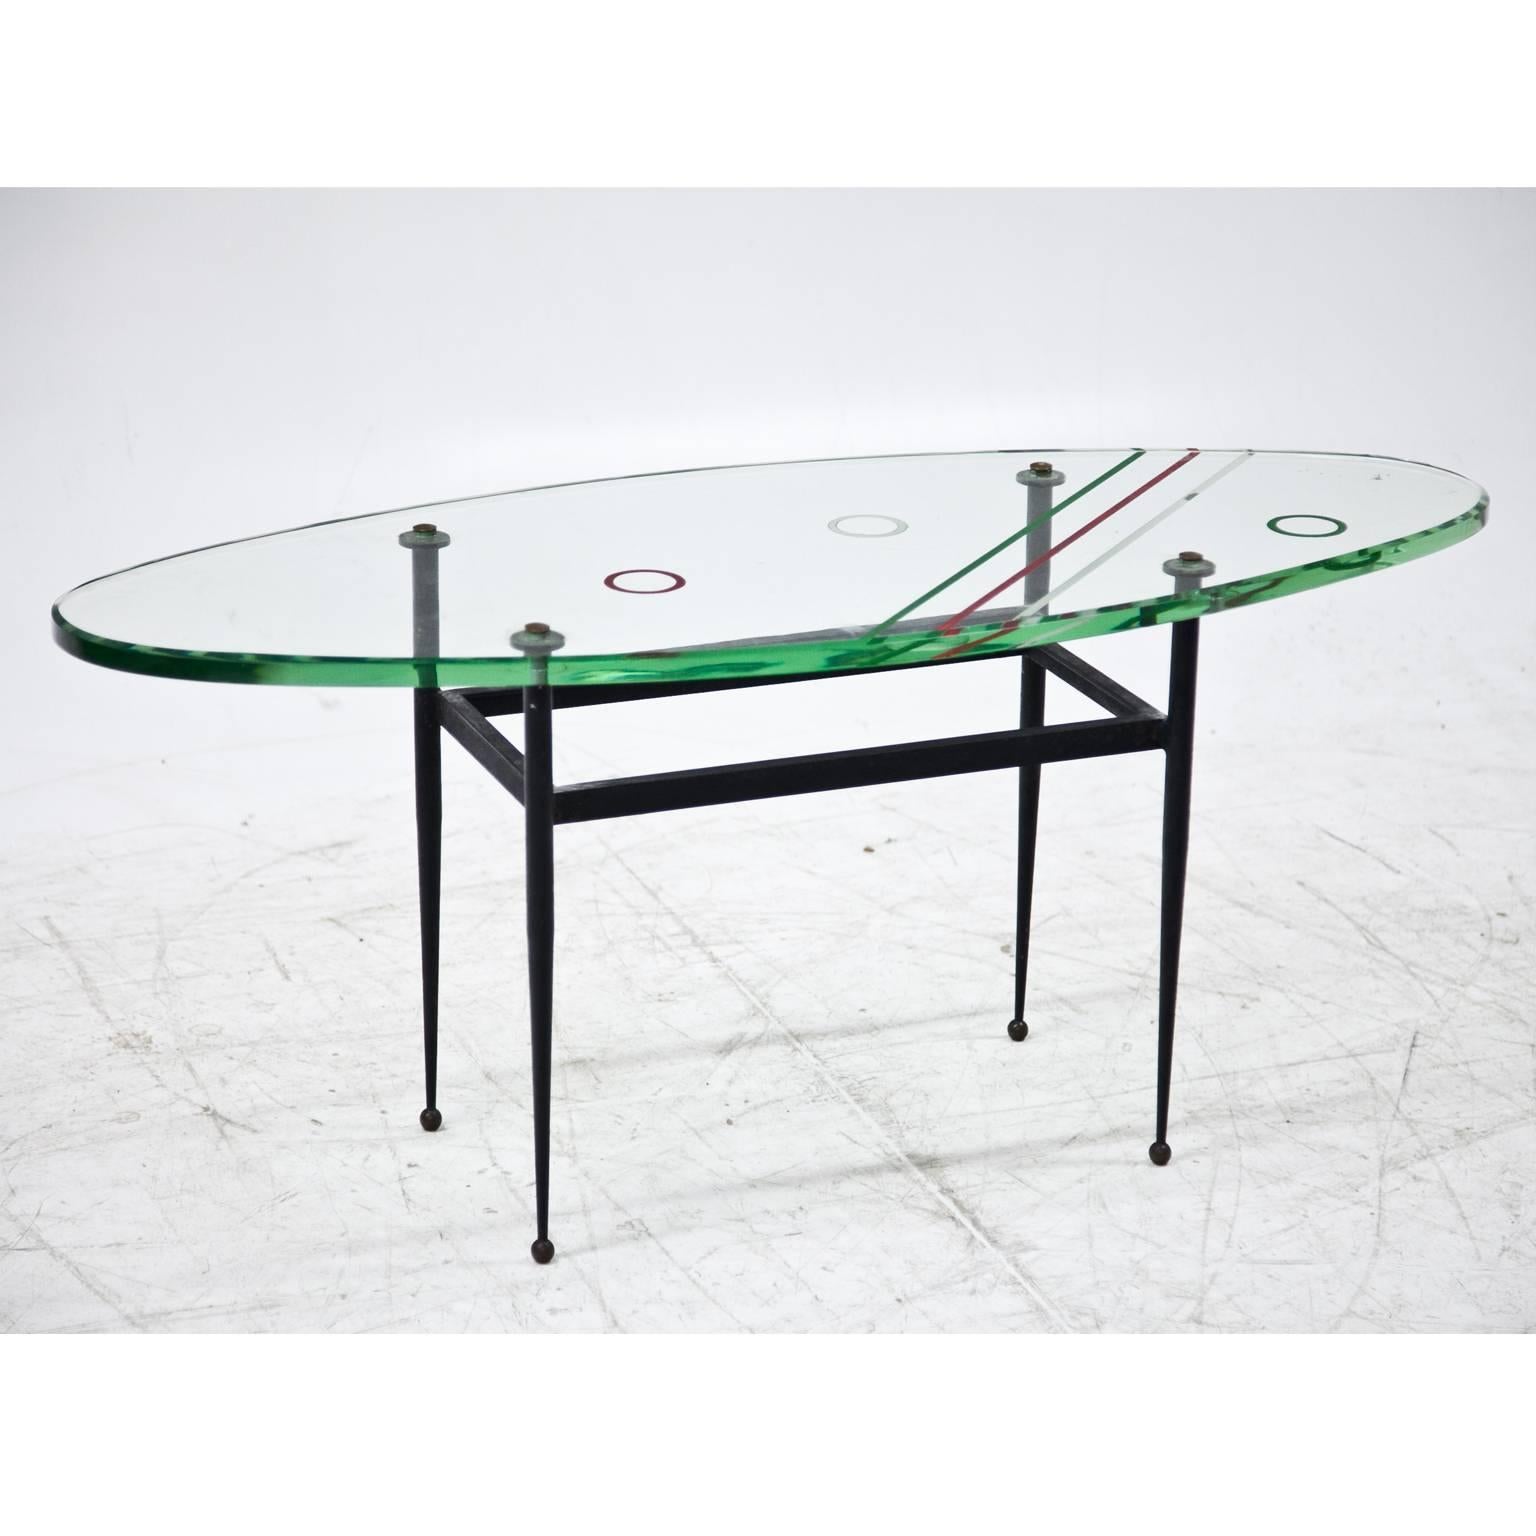 Italian coffee table on slender iron legs. The oval glasstop is painted with circles and lines in green, red and white.